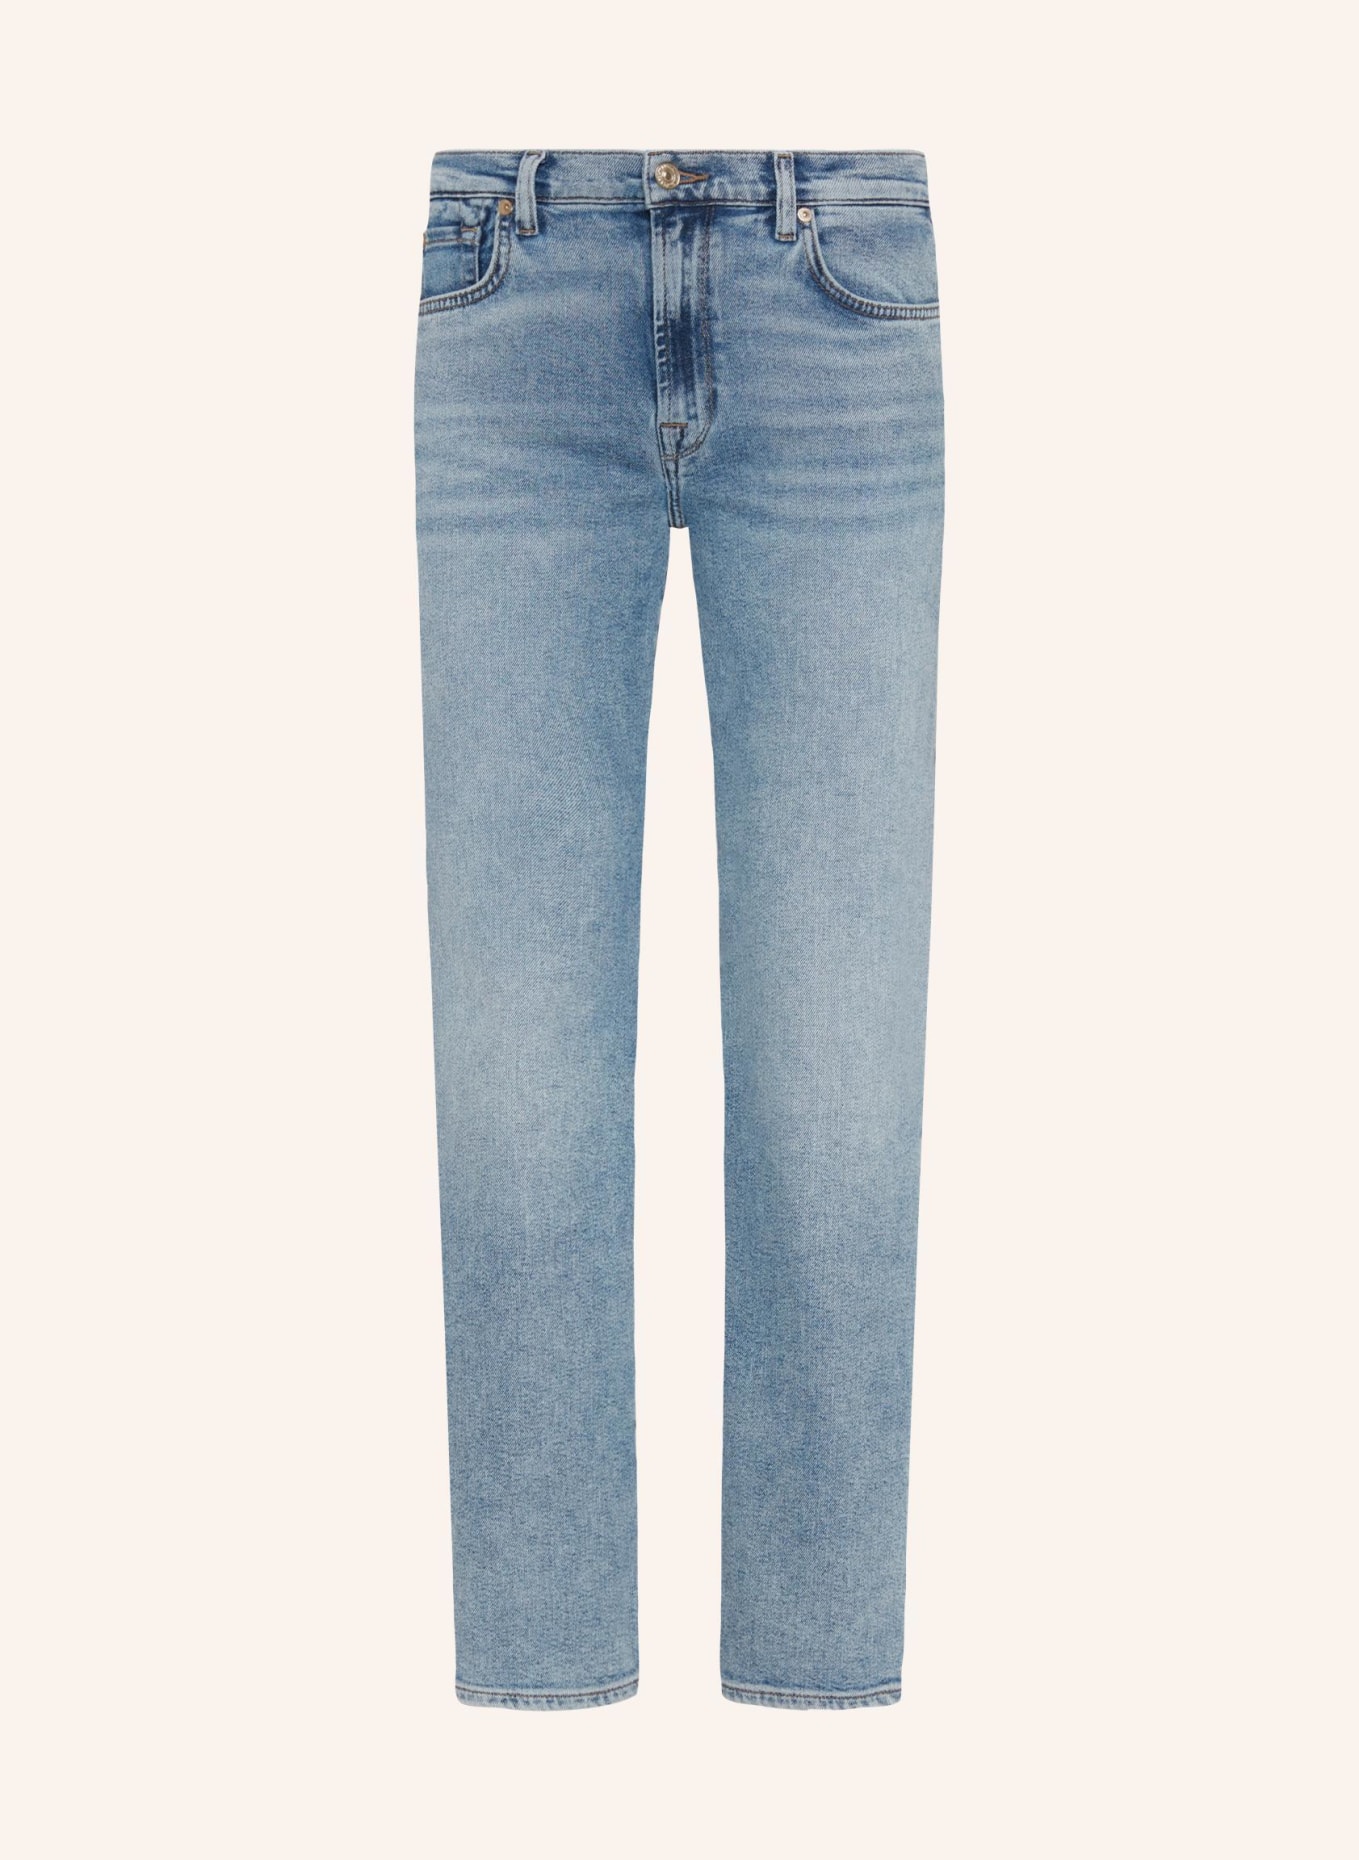 7 for all mankind Jeans ELLIE STRAIGHT Straight Fit, Farbe: BLAU (Bild 1)